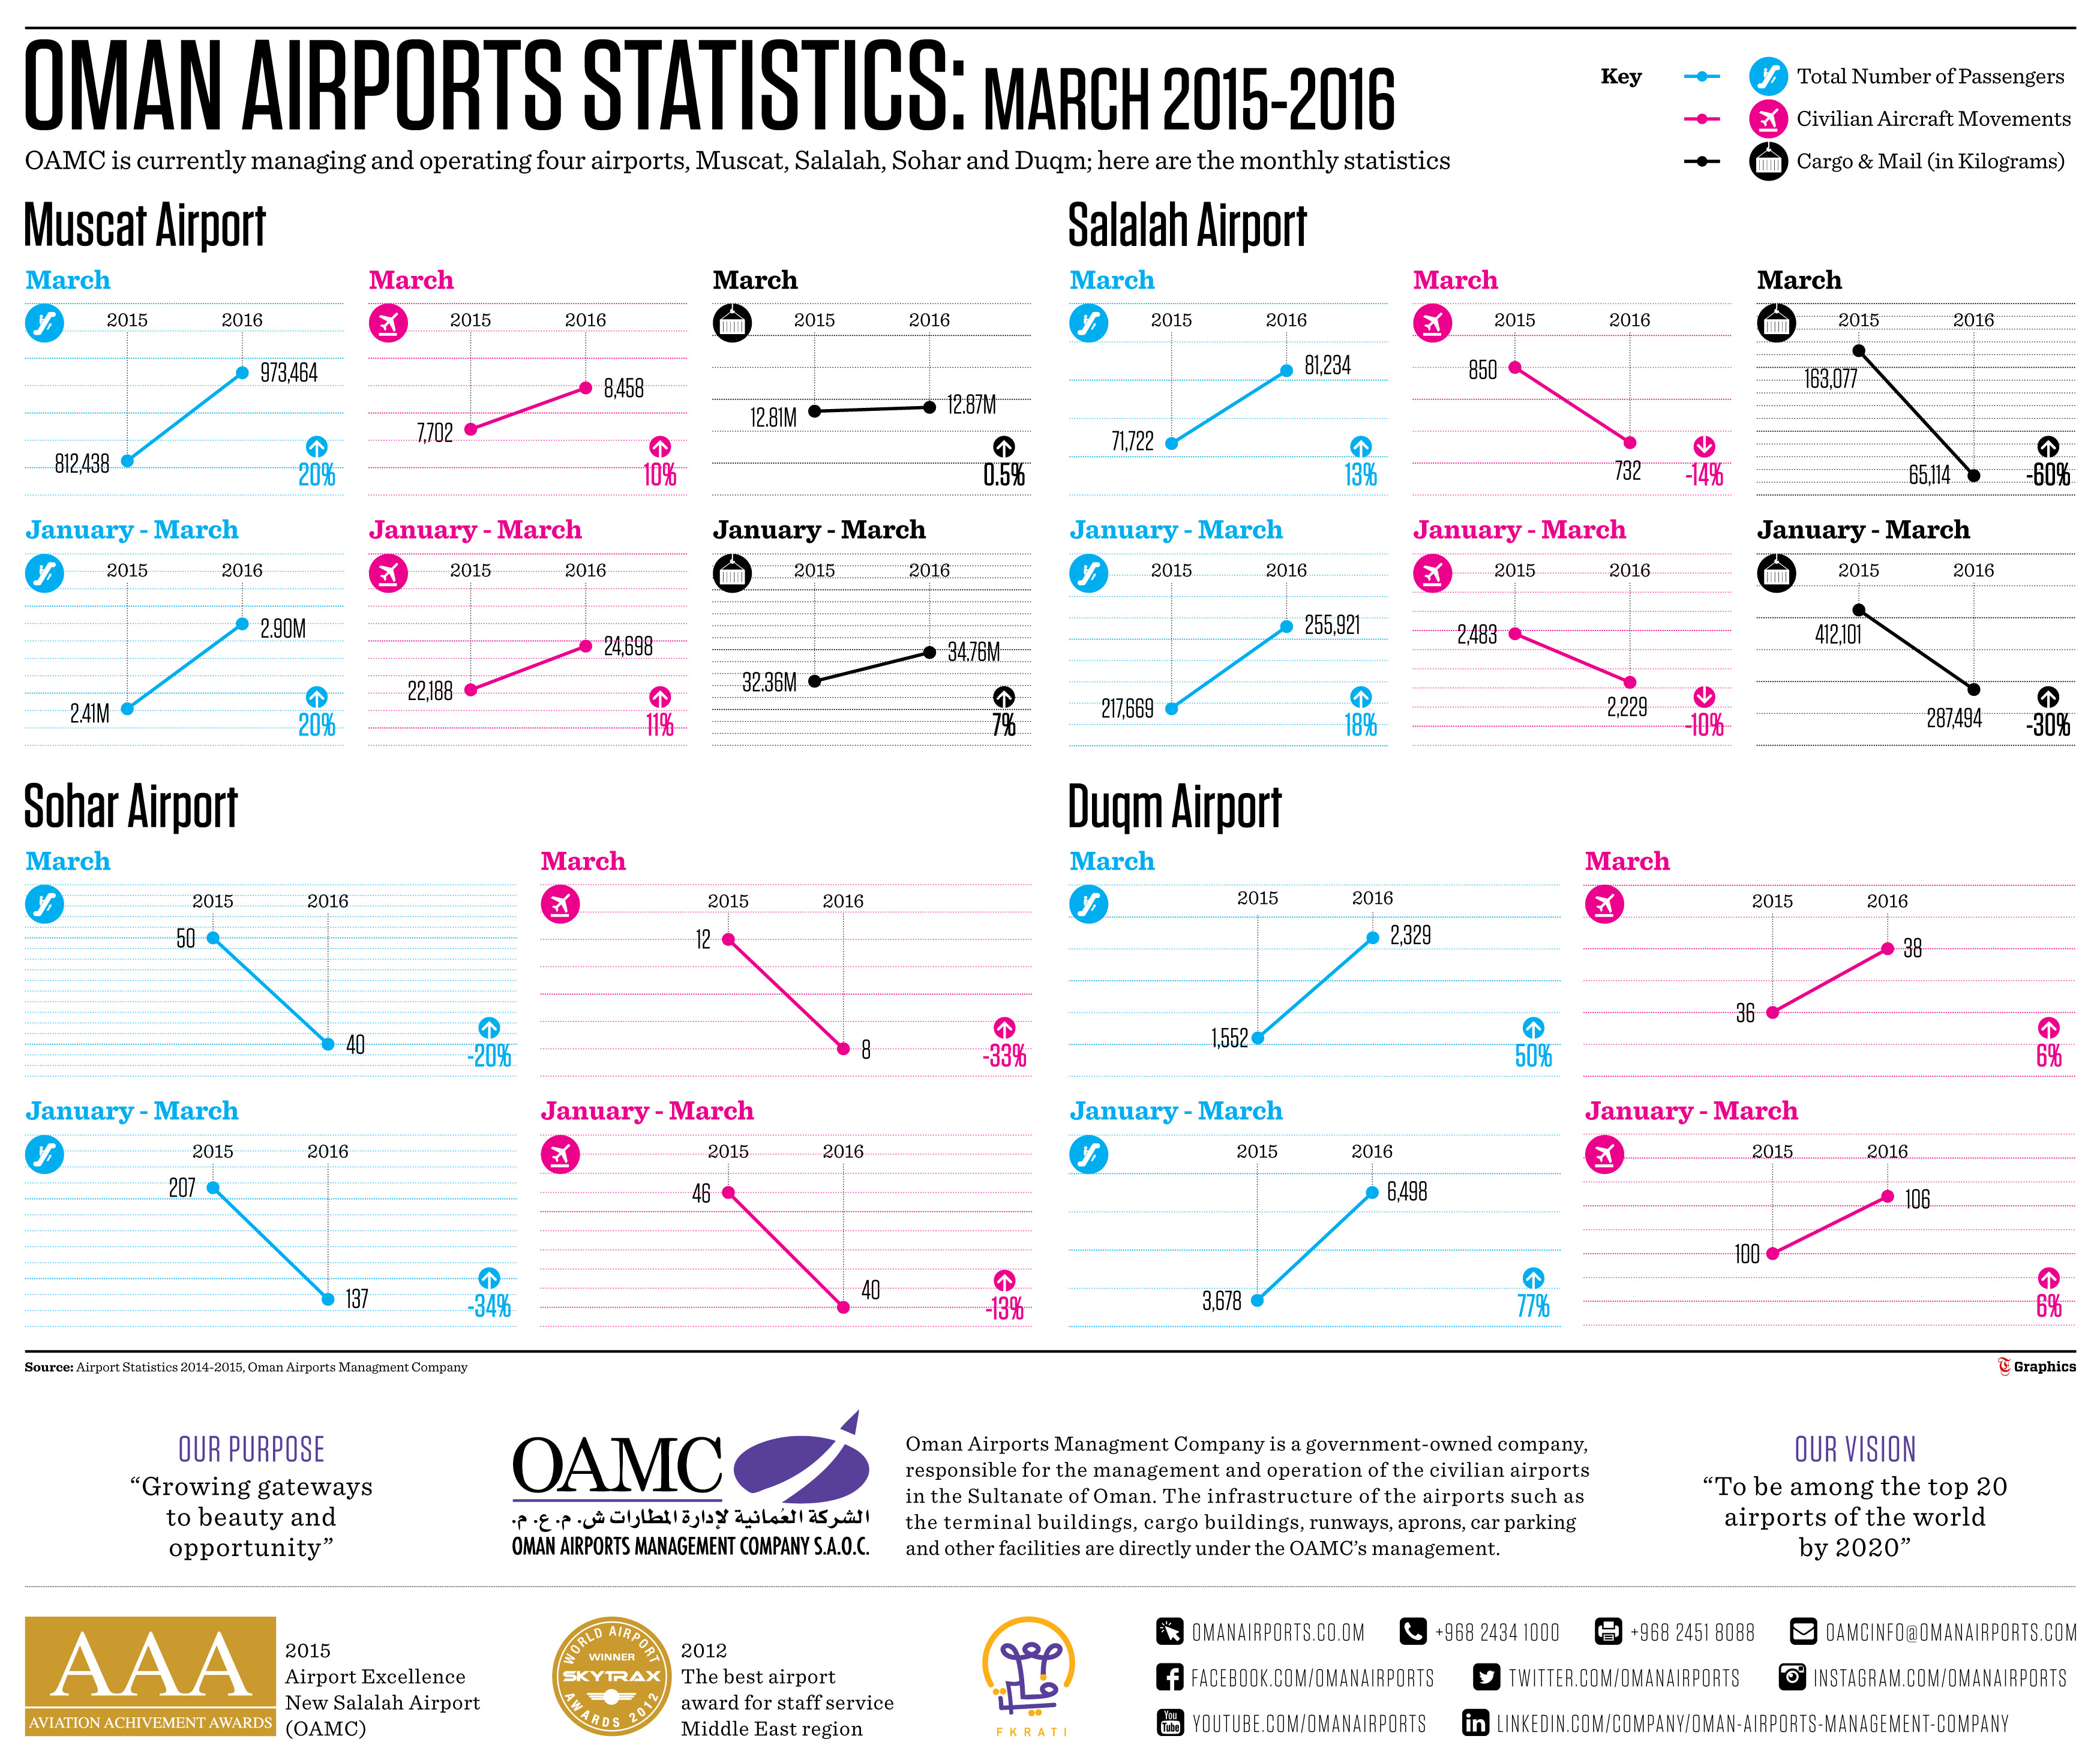 Slew of passenger satisfaction initiatives from Oman Airport Management Company